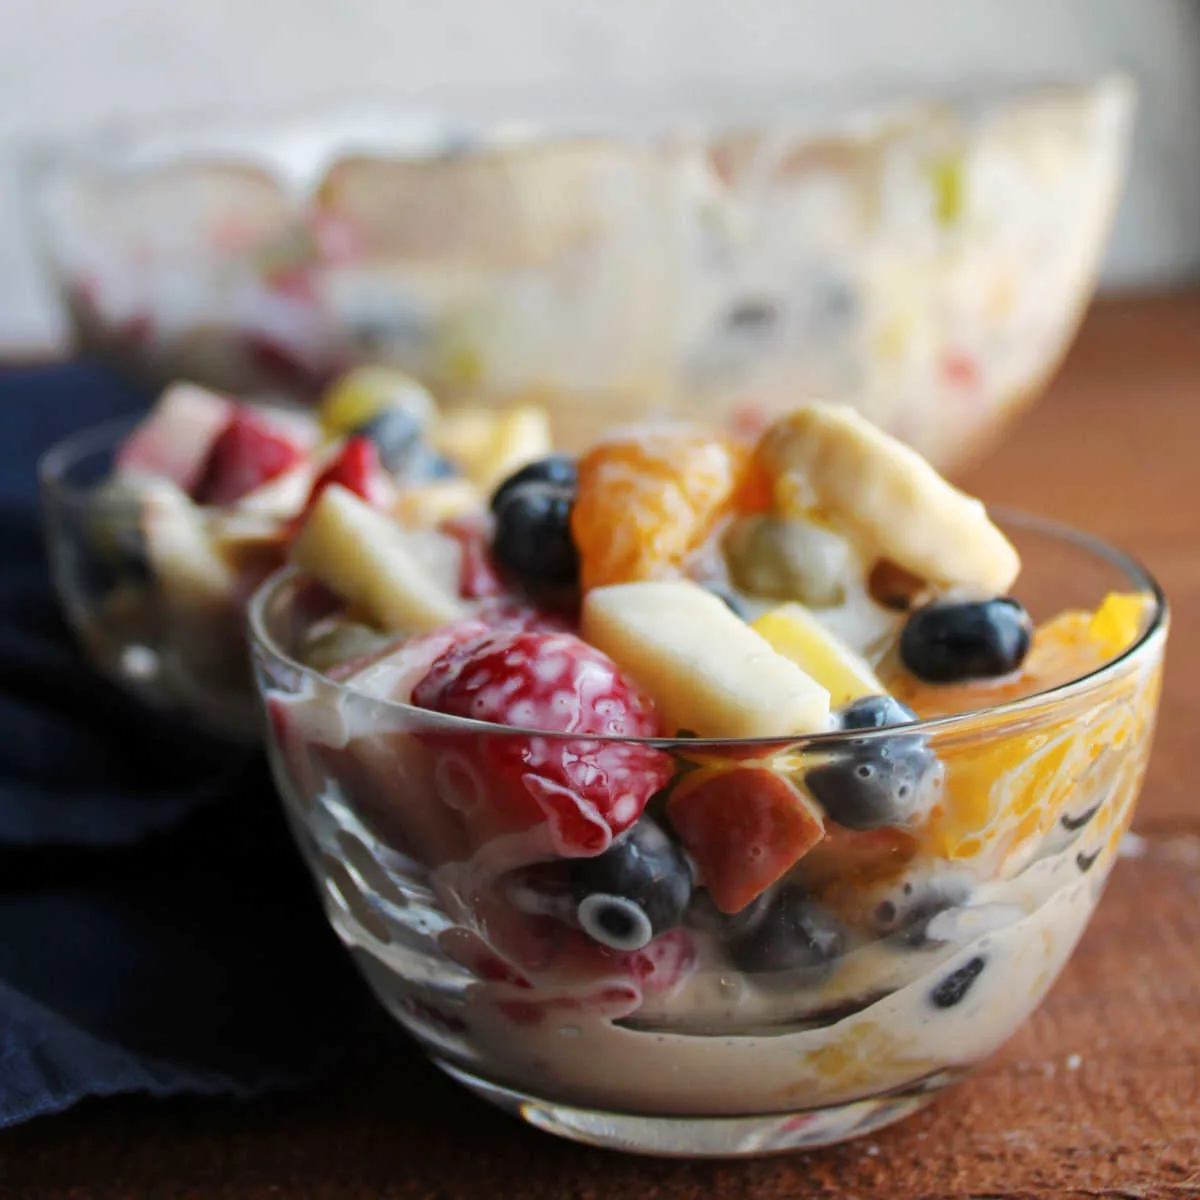 Small glass bowls of fruit salad with fresh berries, bananas, oranges, pineapple, and apples dressed with condensed milk and lemon juice.